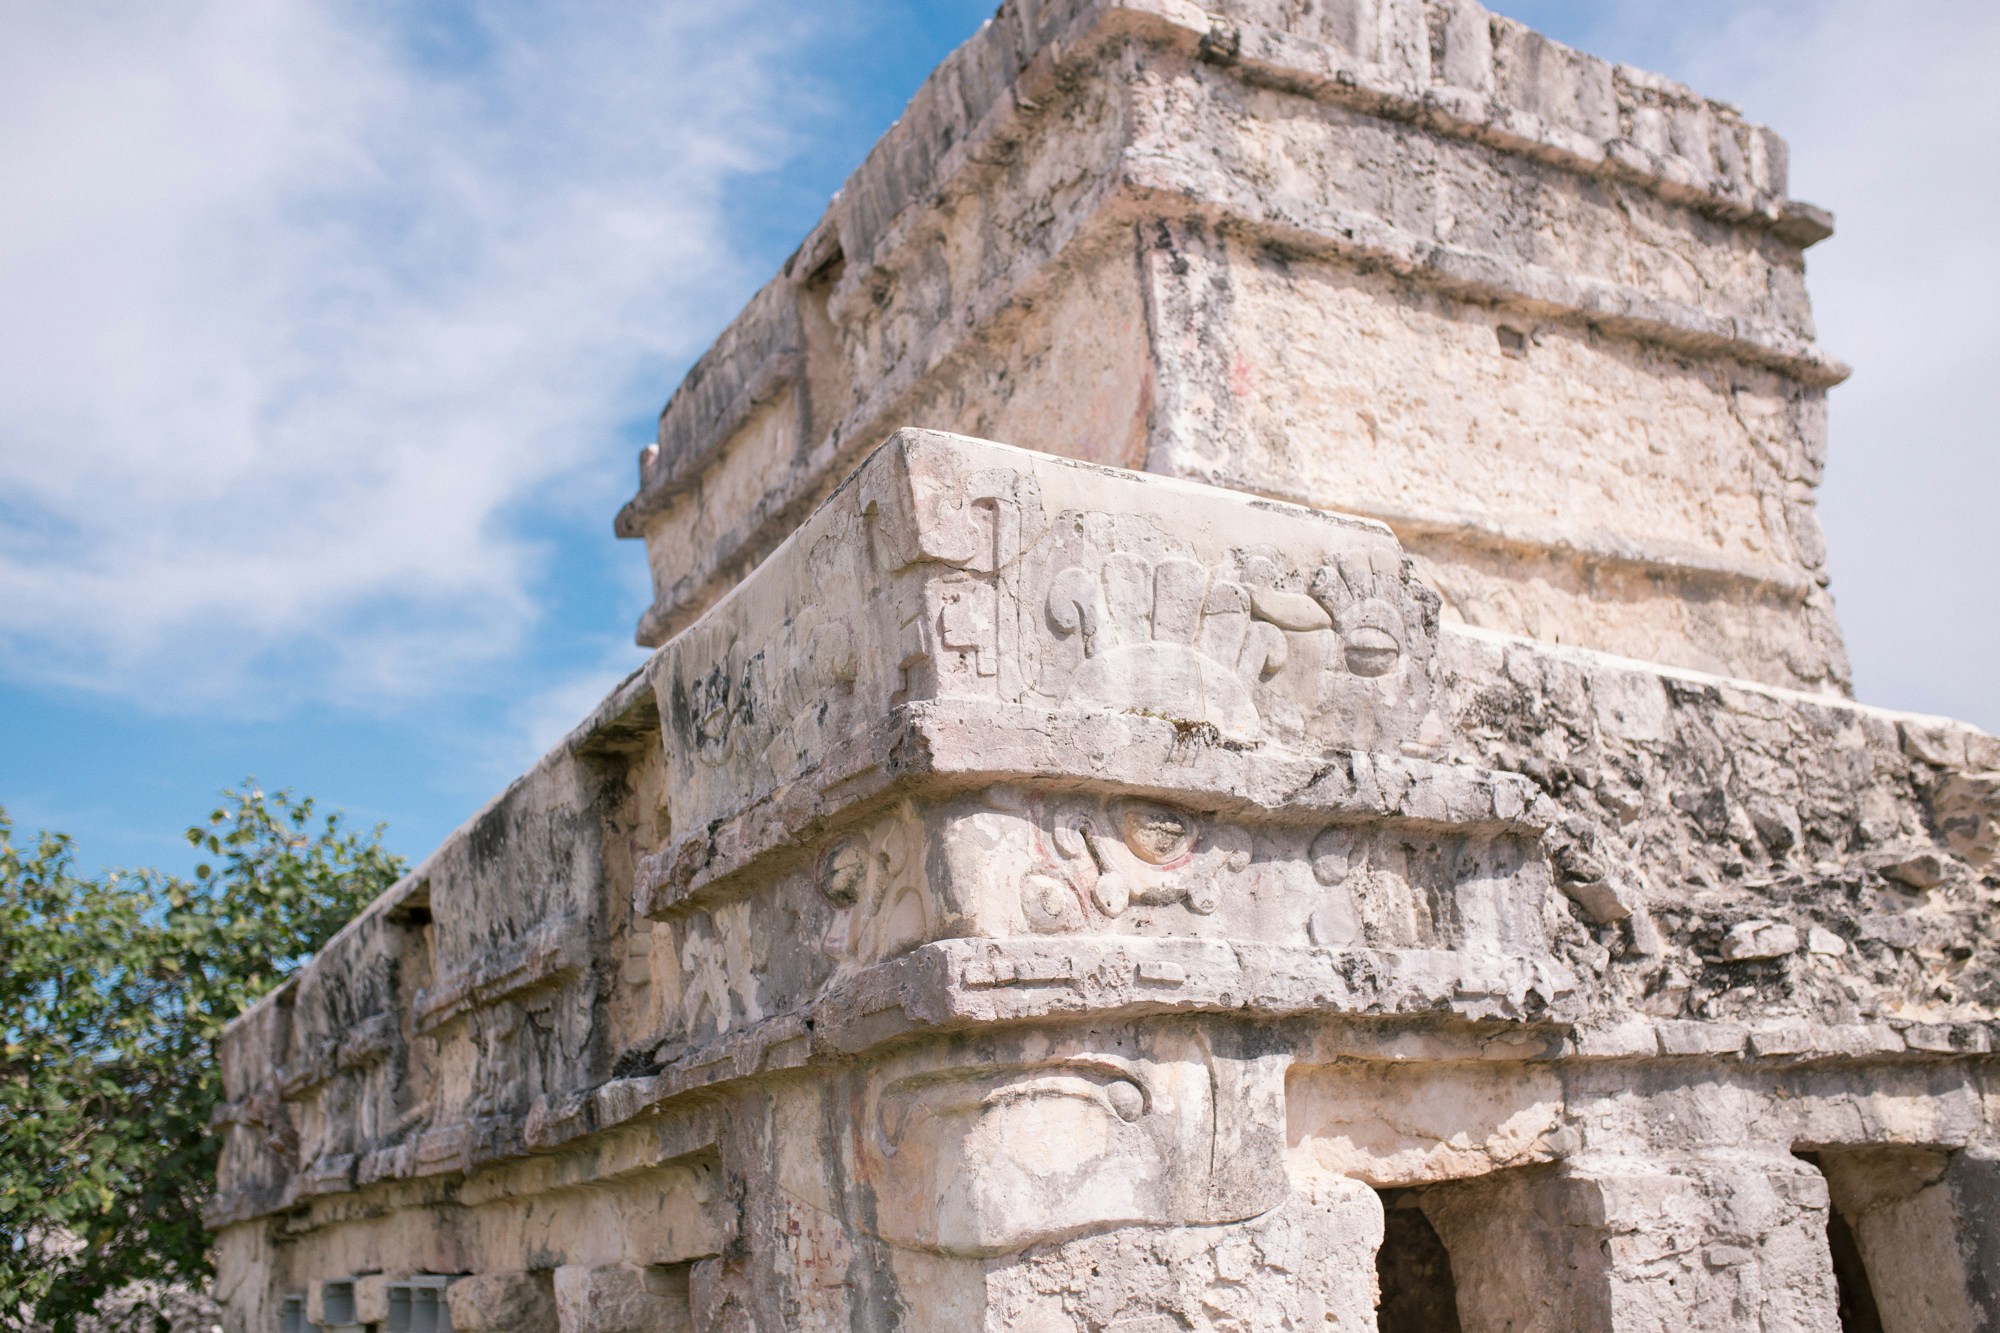 Details of a Mayan building in Tulum, Mexico